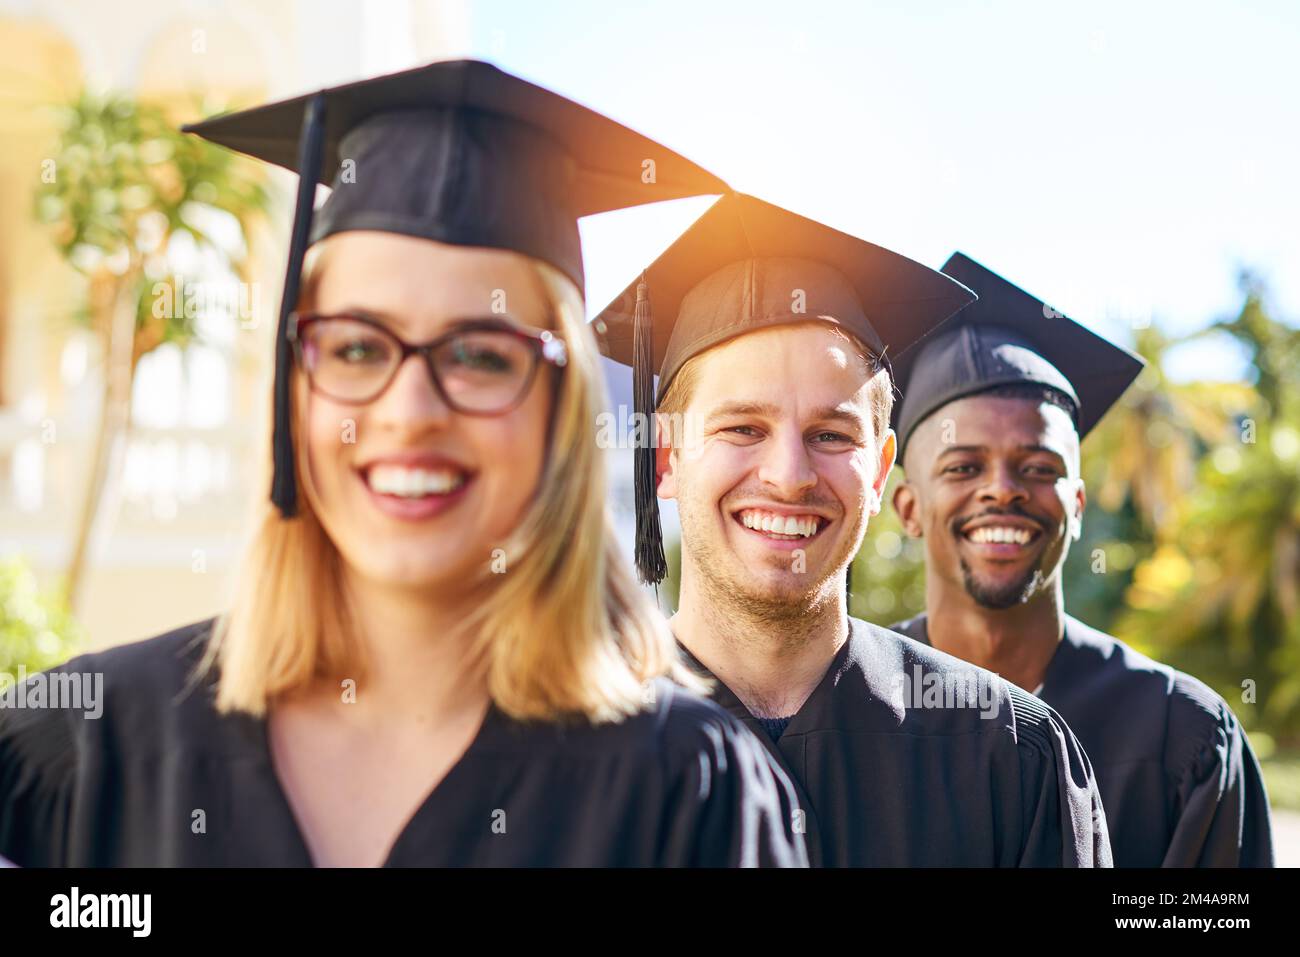 Were ready to give ourselves over to the professional world. students on graduation day from university. Stock Photo